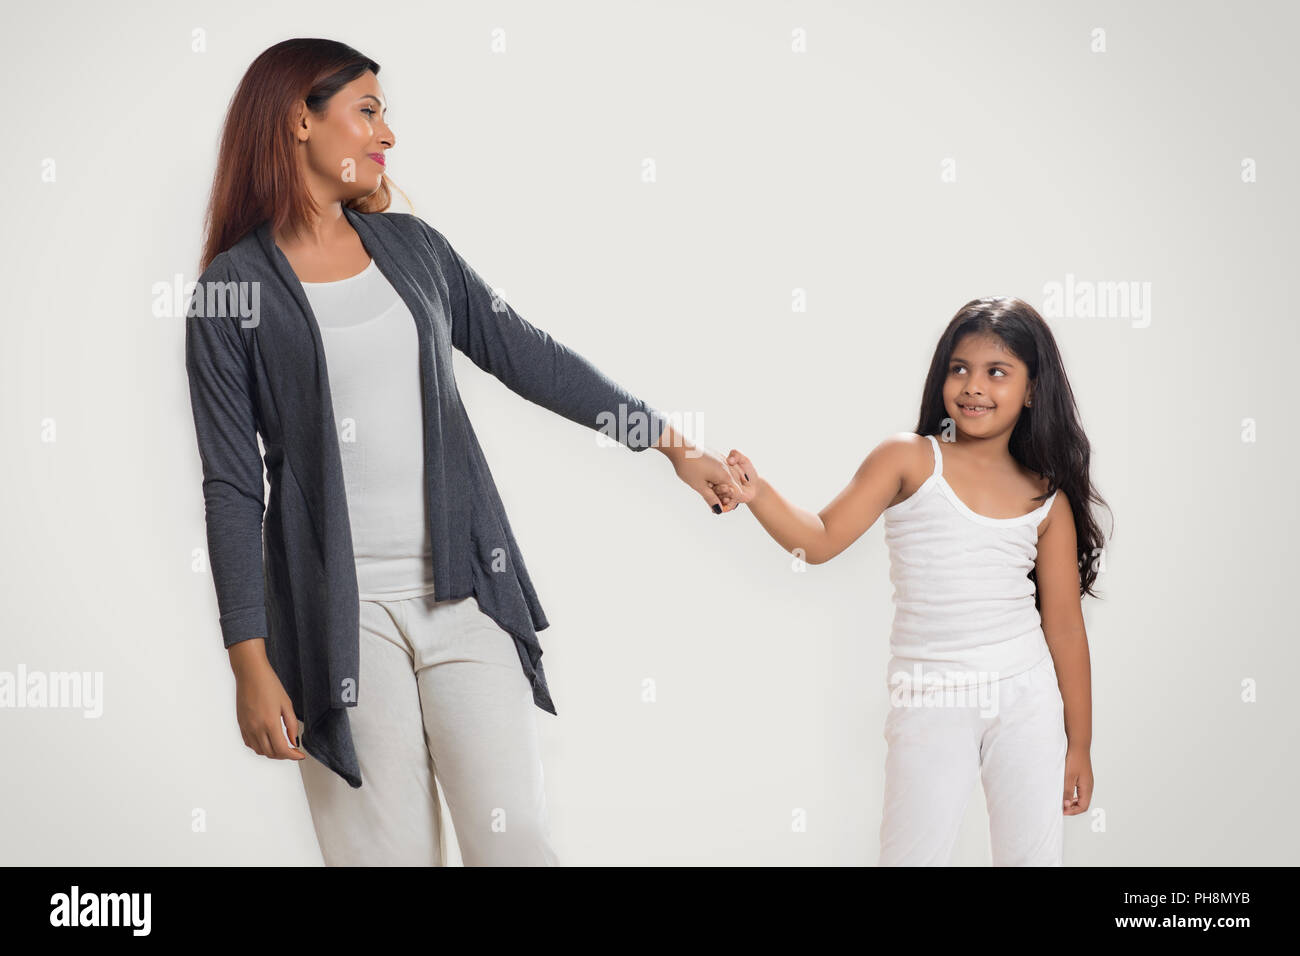 Smiling mother and daughter holding hands Banque D'Images